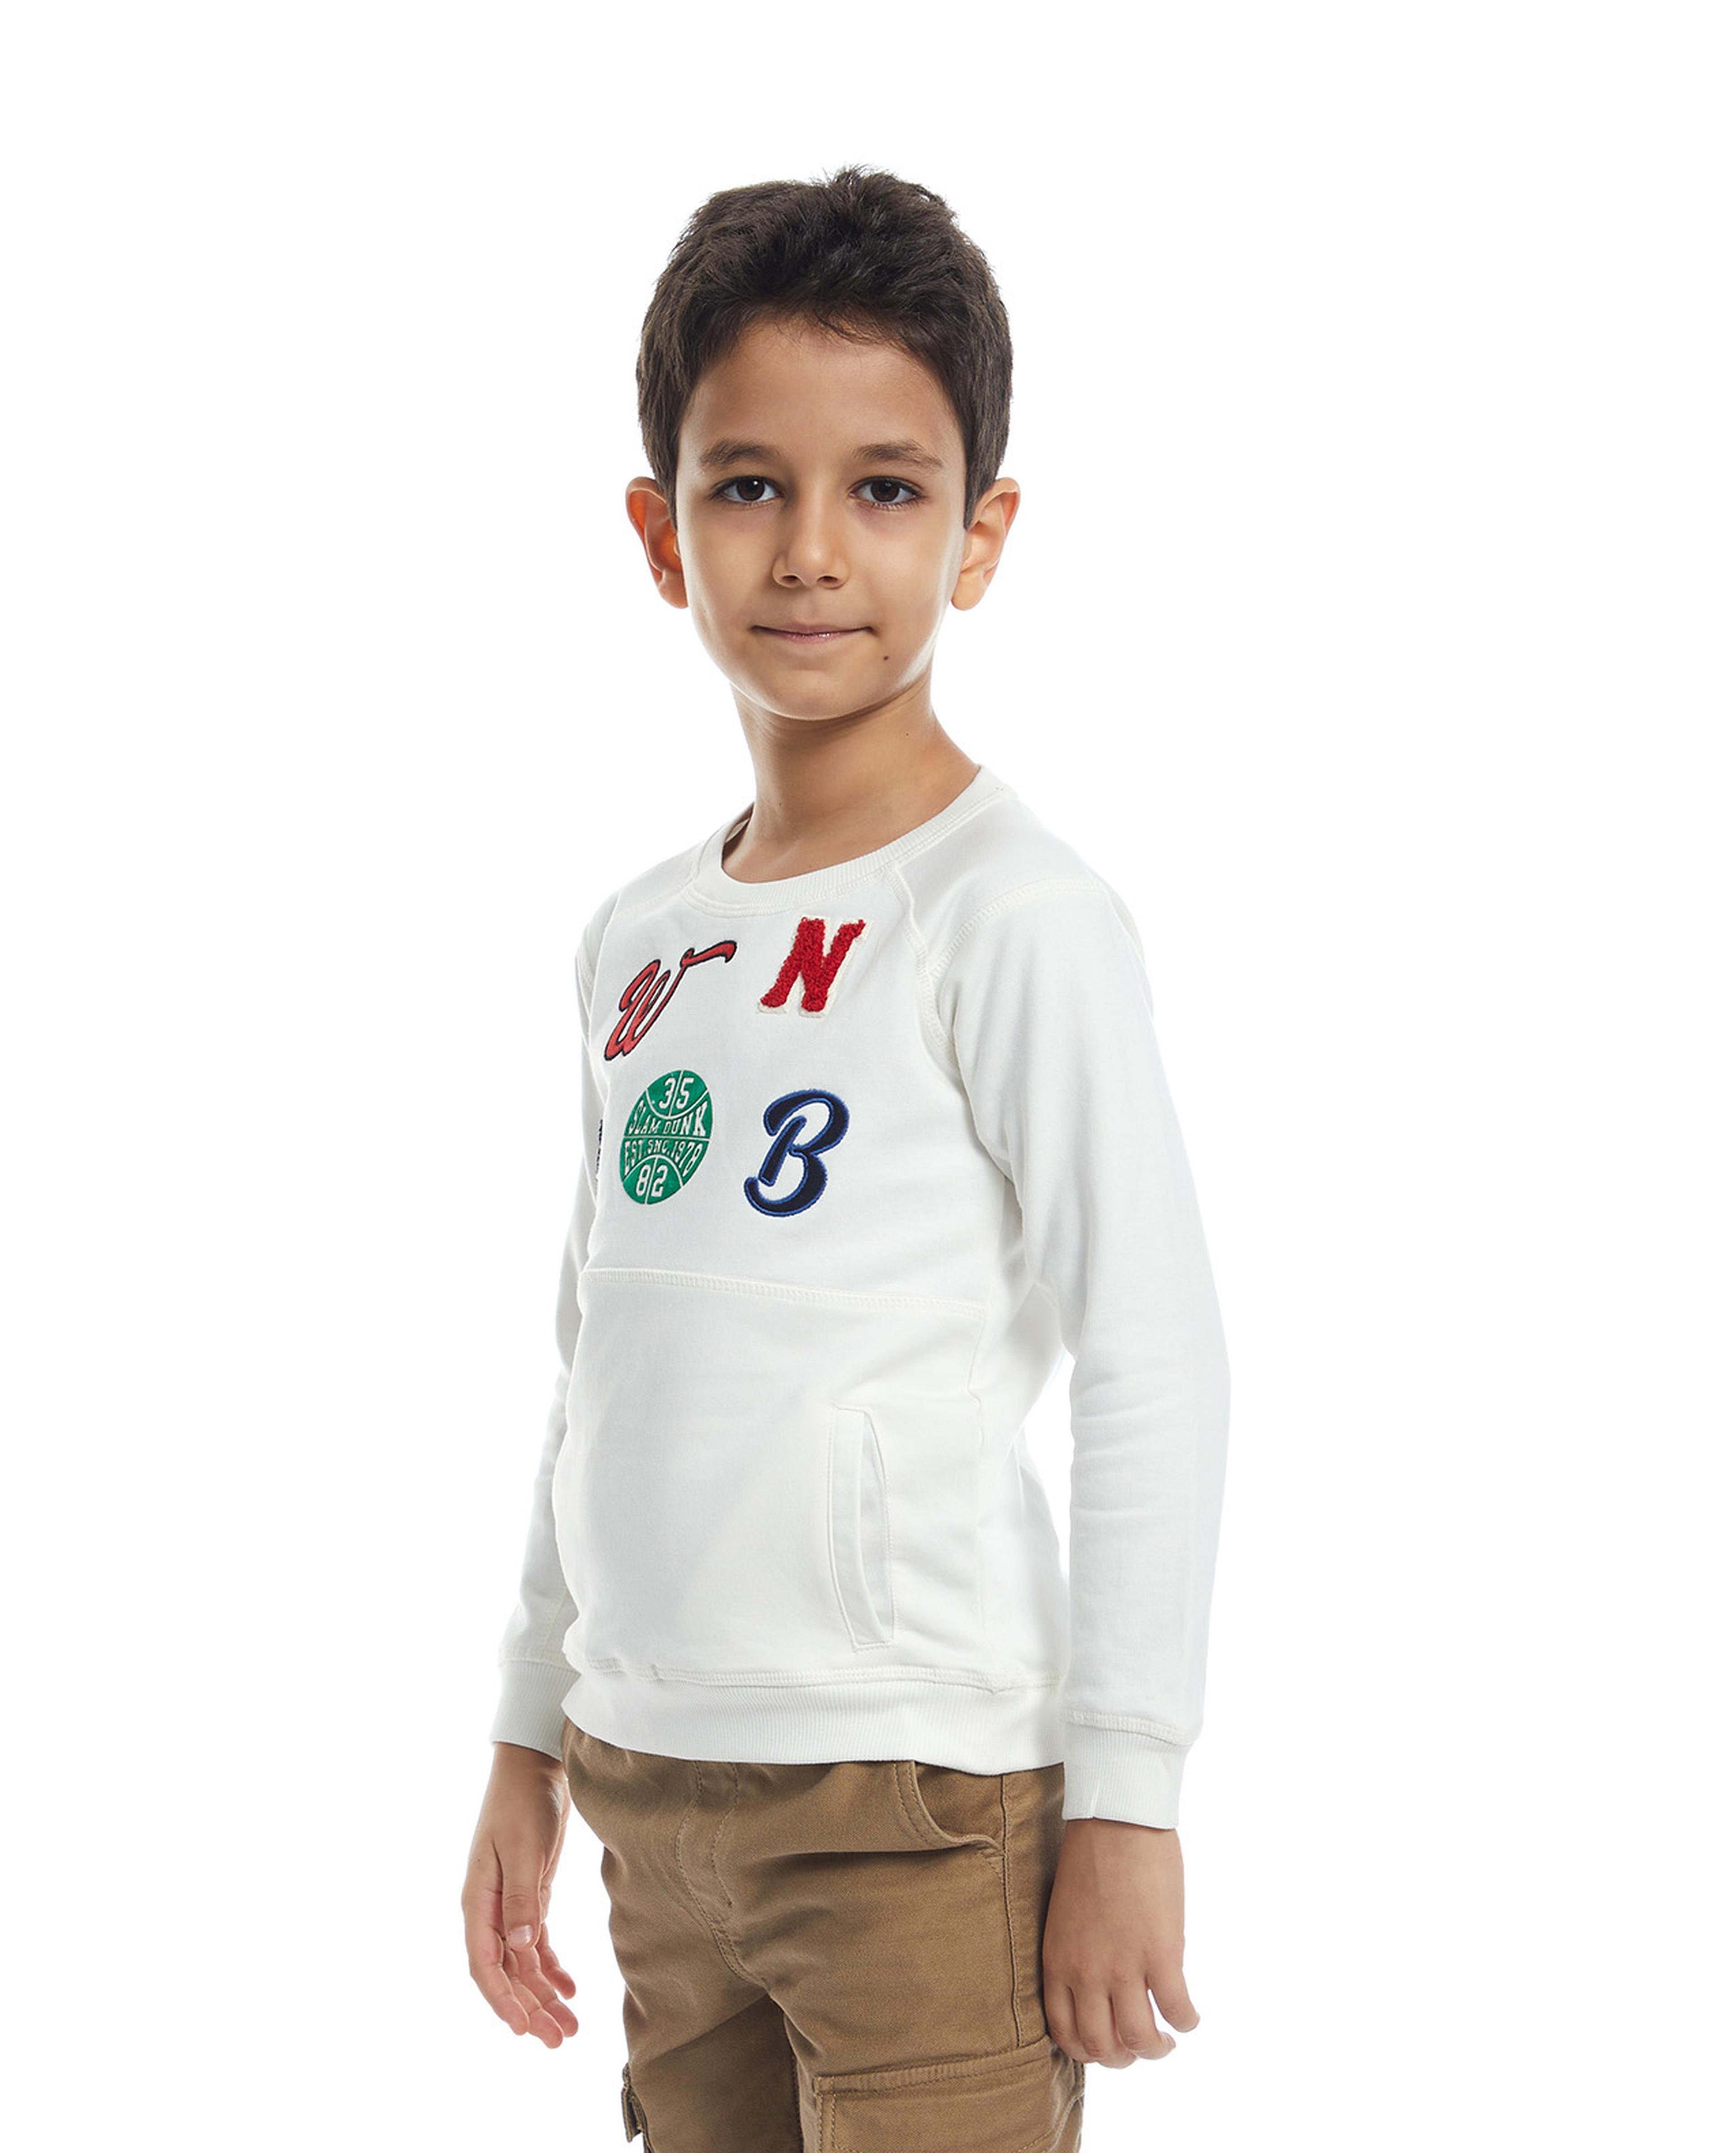 Applique Sweatshirt with Crew Neck and Long Sleeves